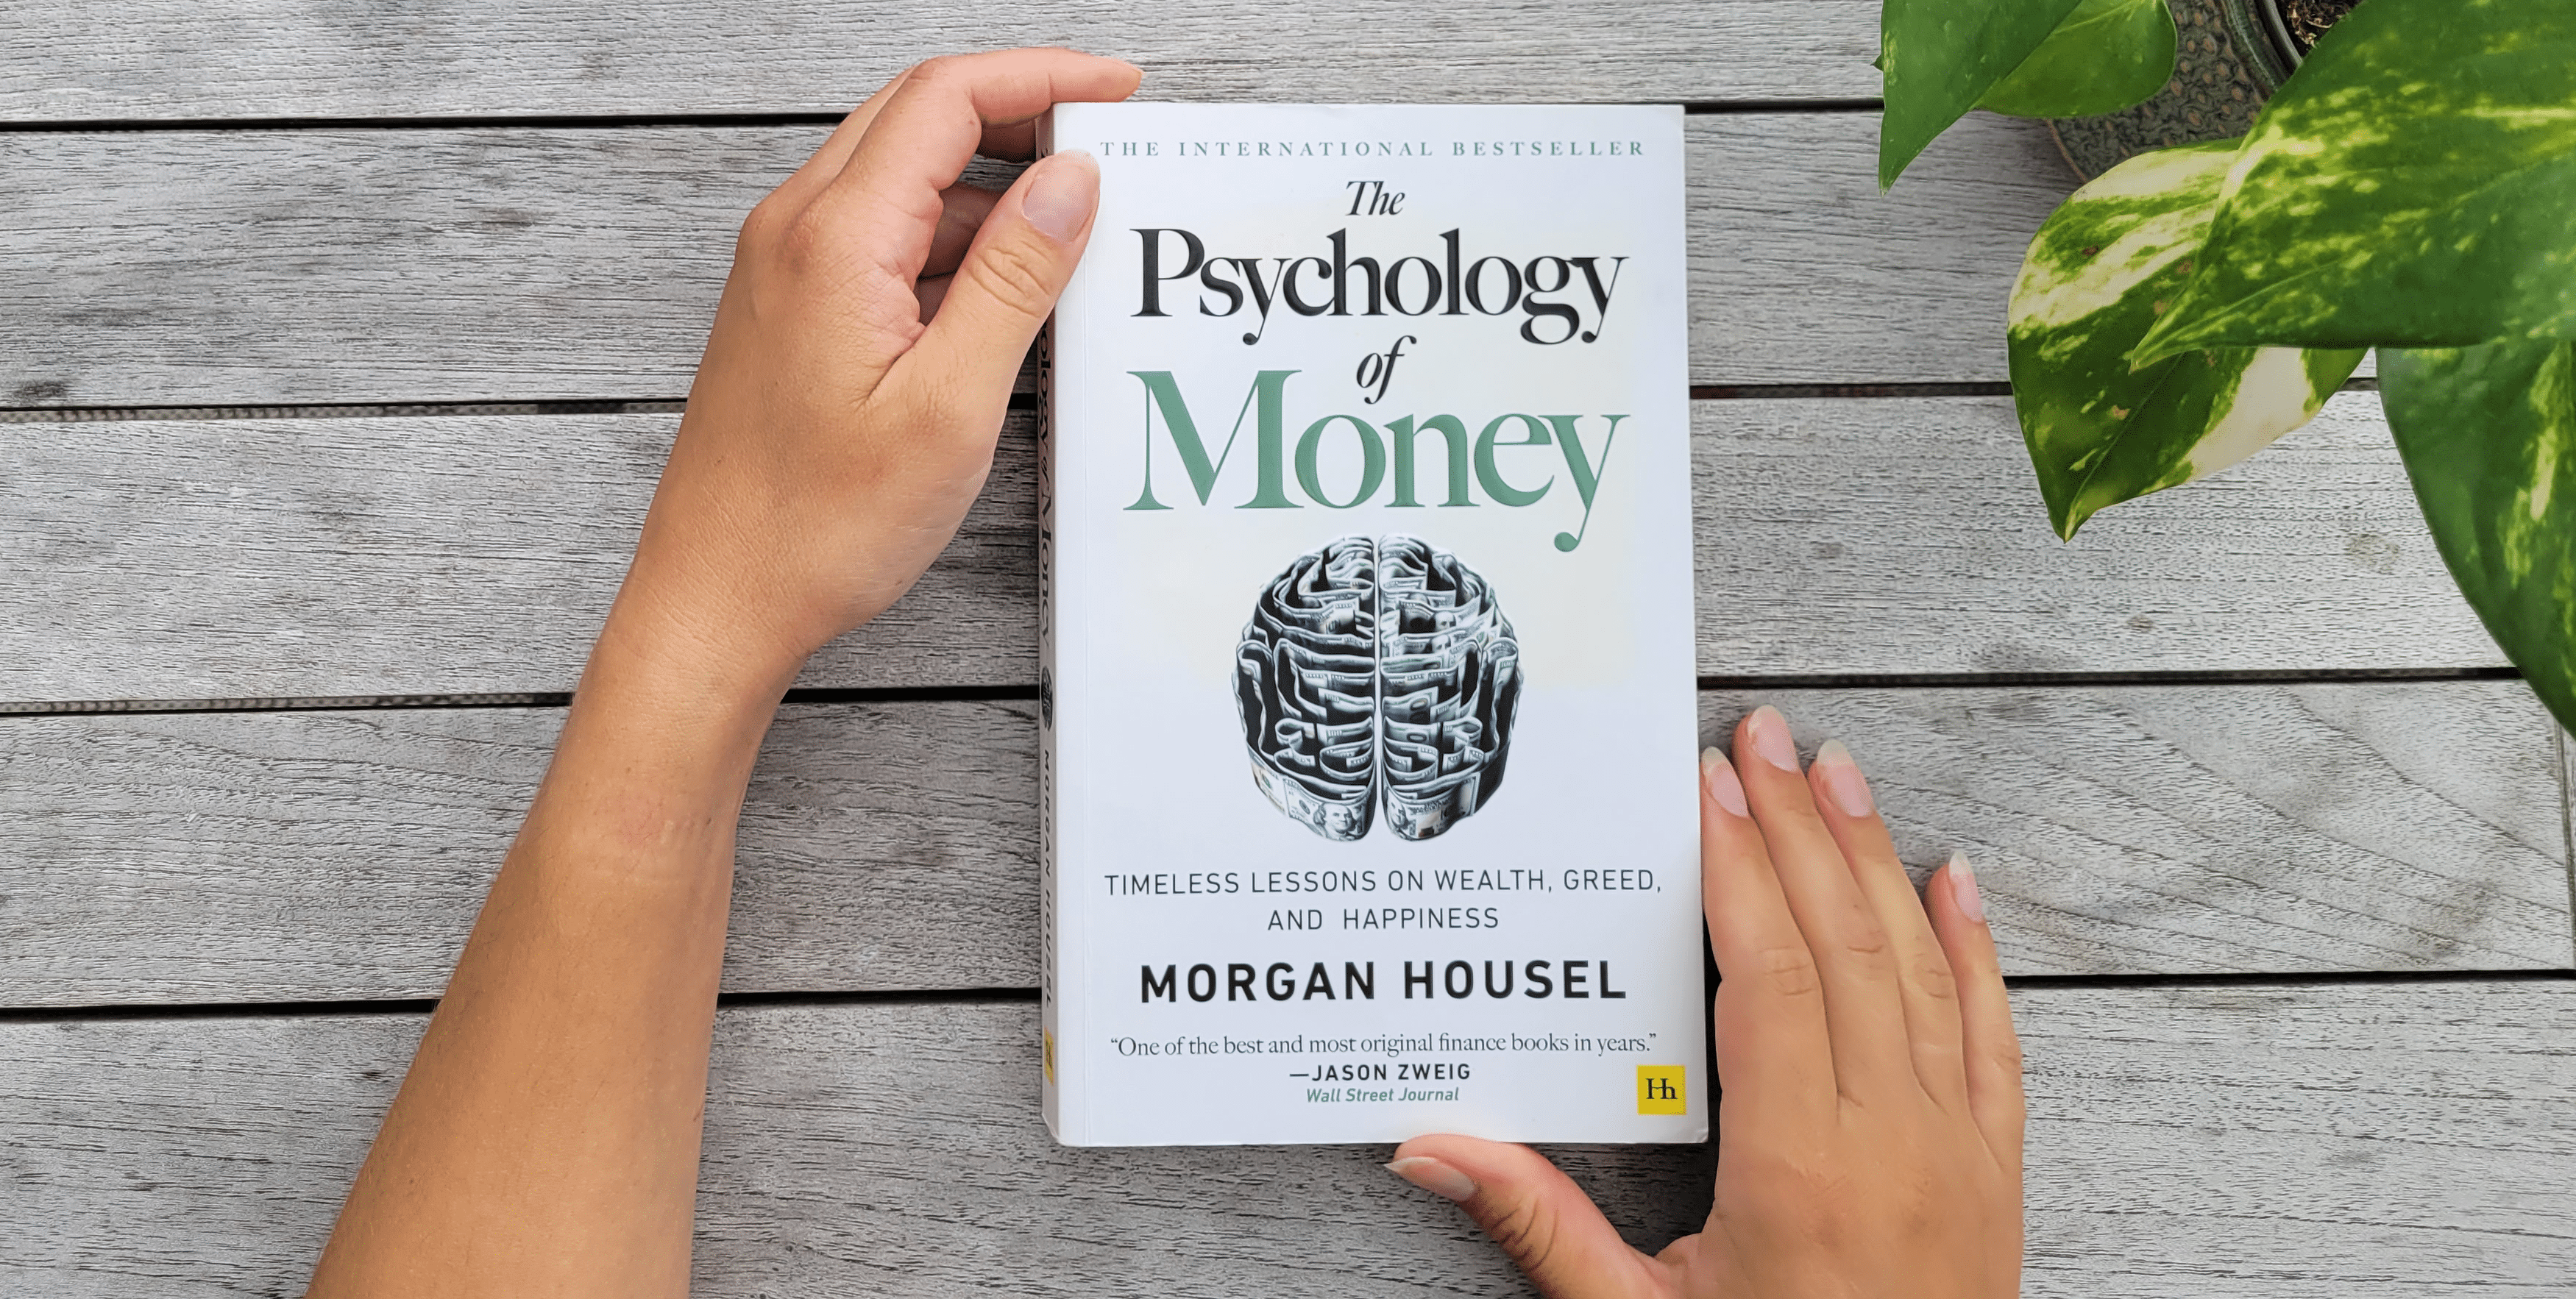 Summary: The Psychology of Money by Morgan Housel